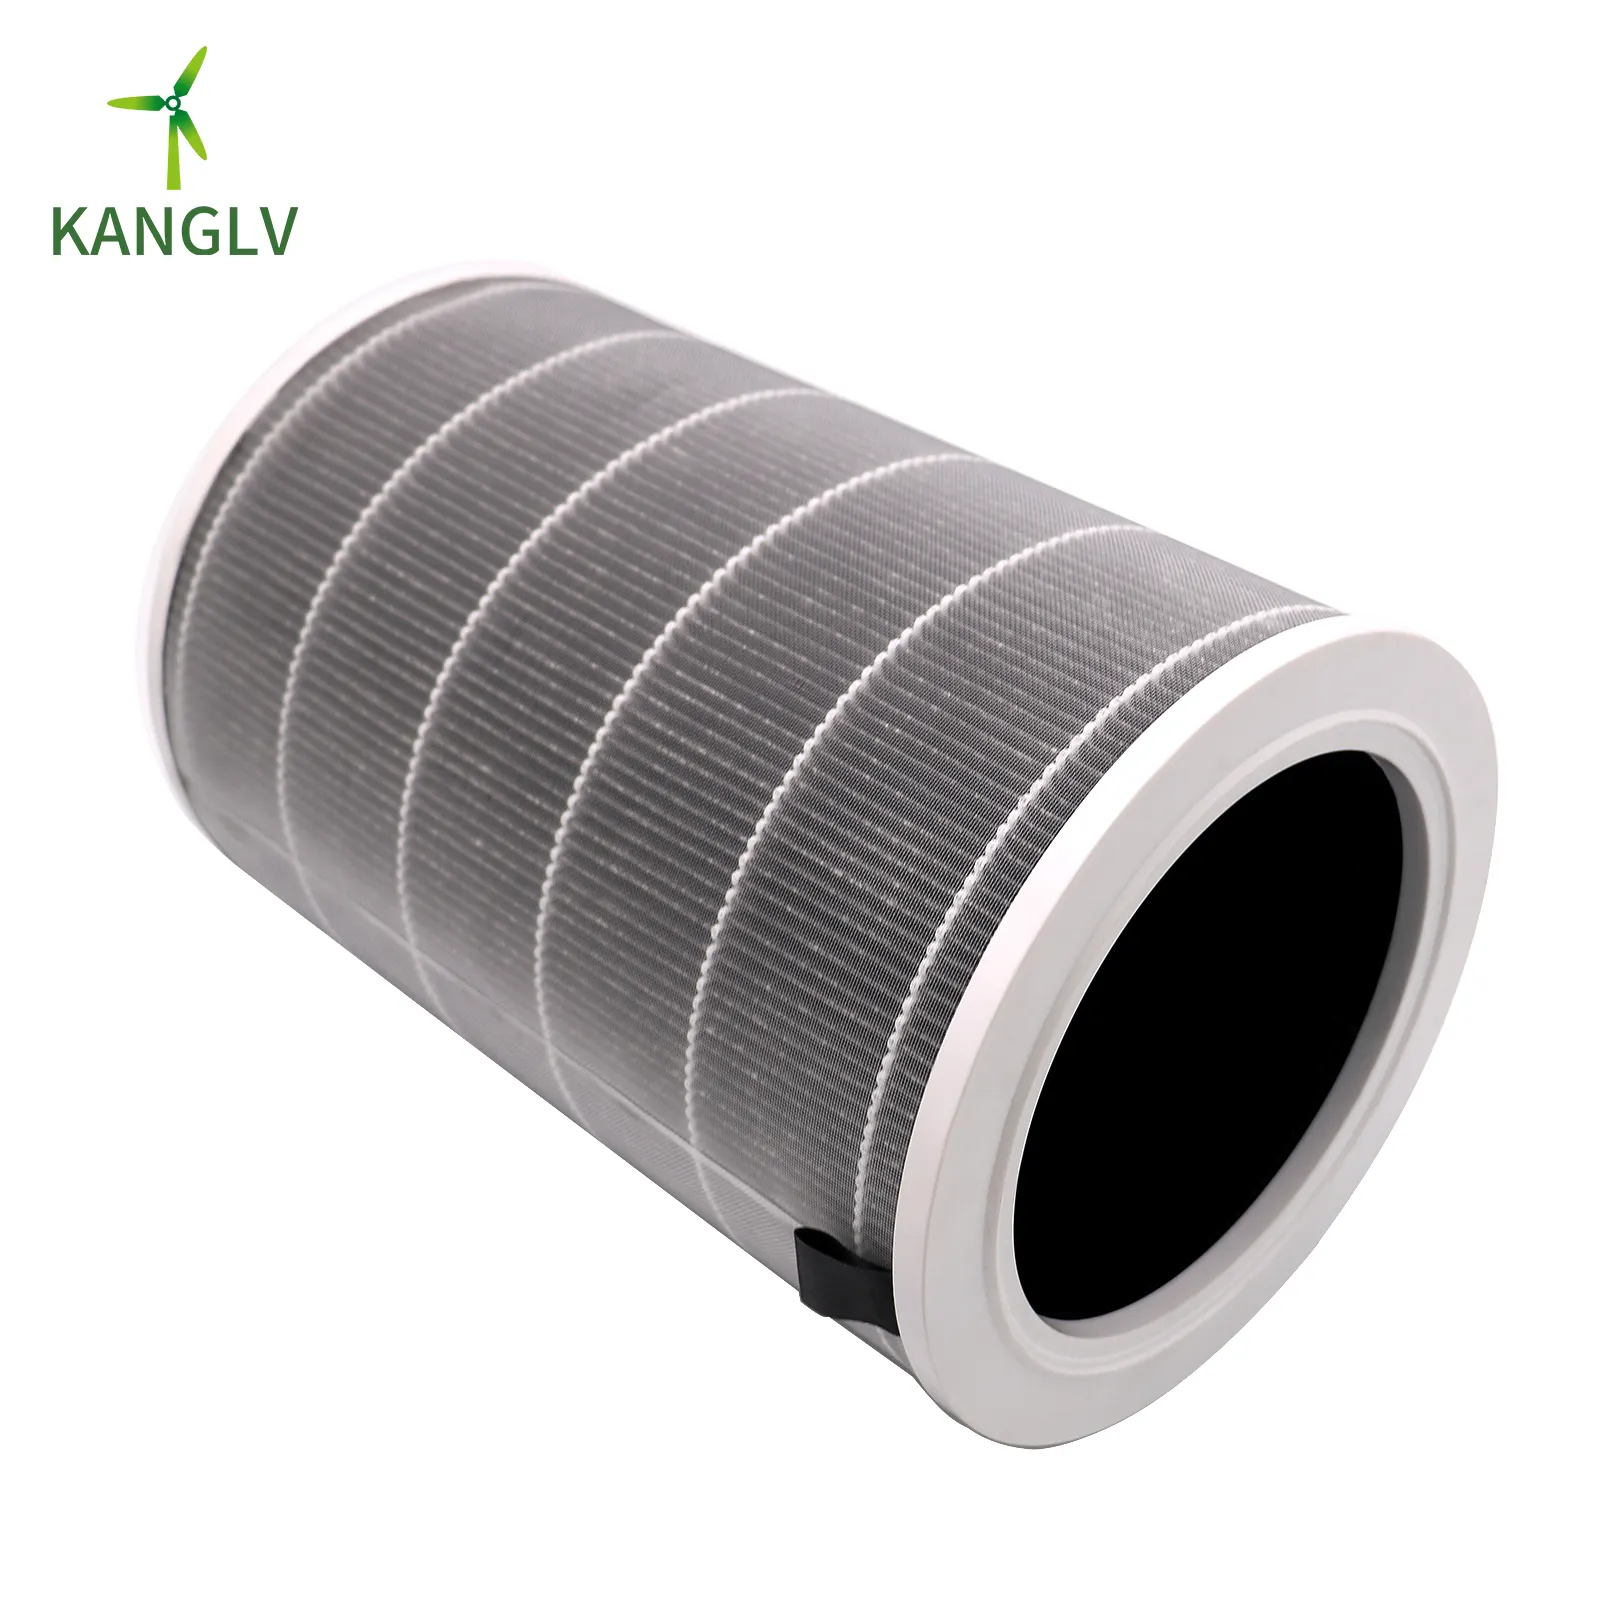 Filter Replacement Antibacterial Edition for Xiaomi Air Purifier Pro H with RFID recognition